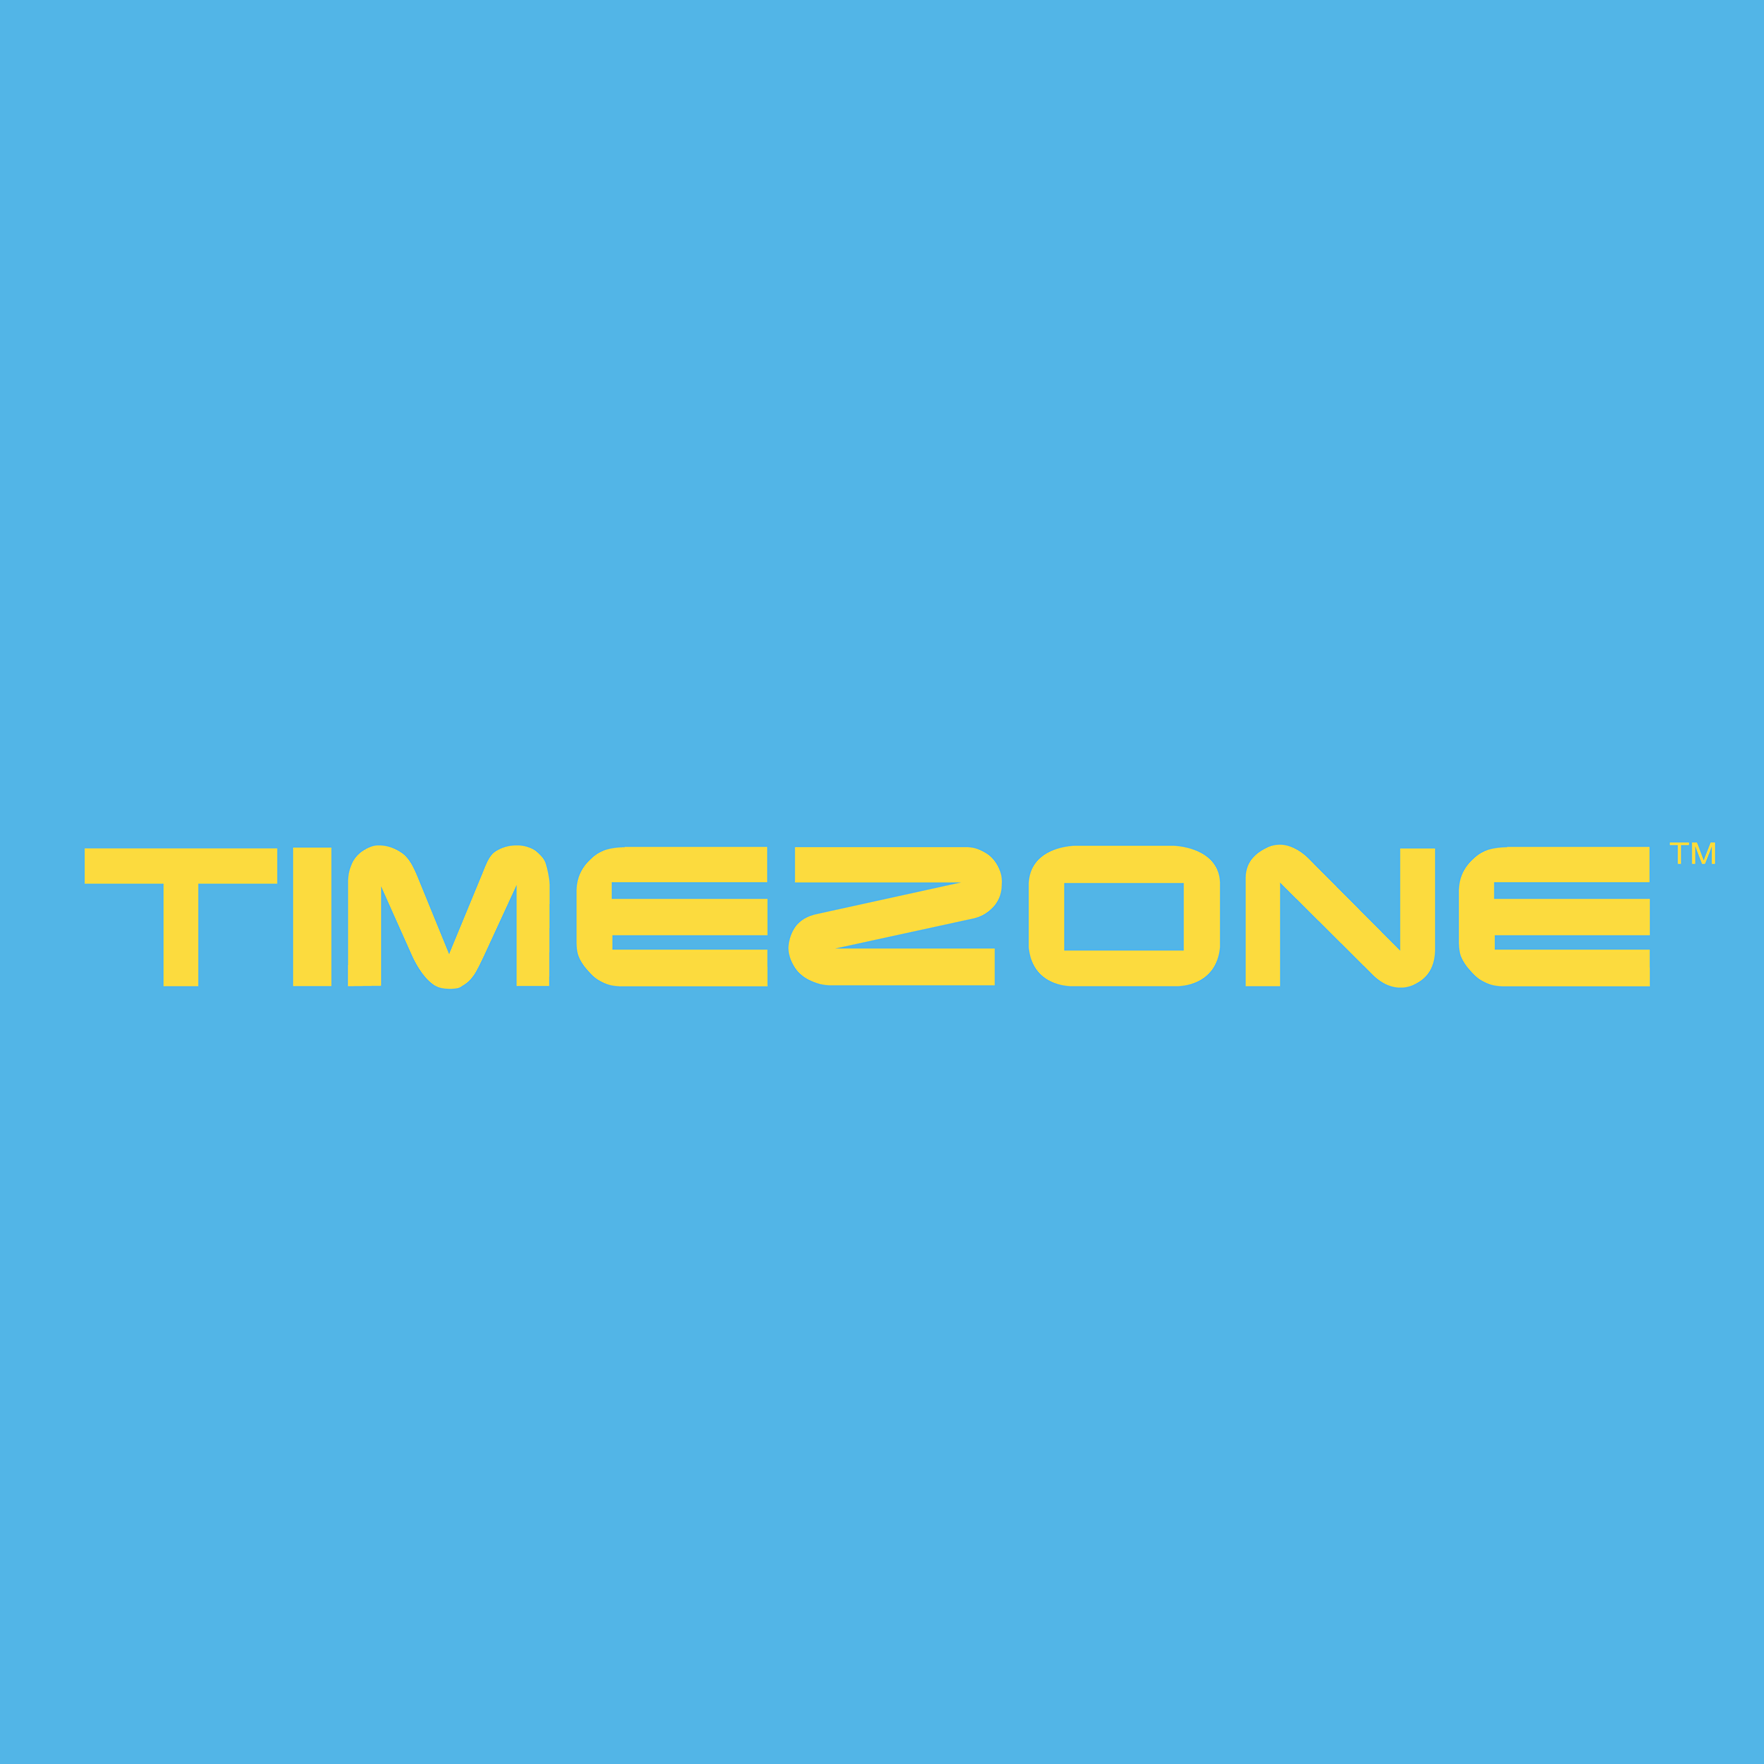 Timezone (Parkway Parade) - Dine, Shop, Earn